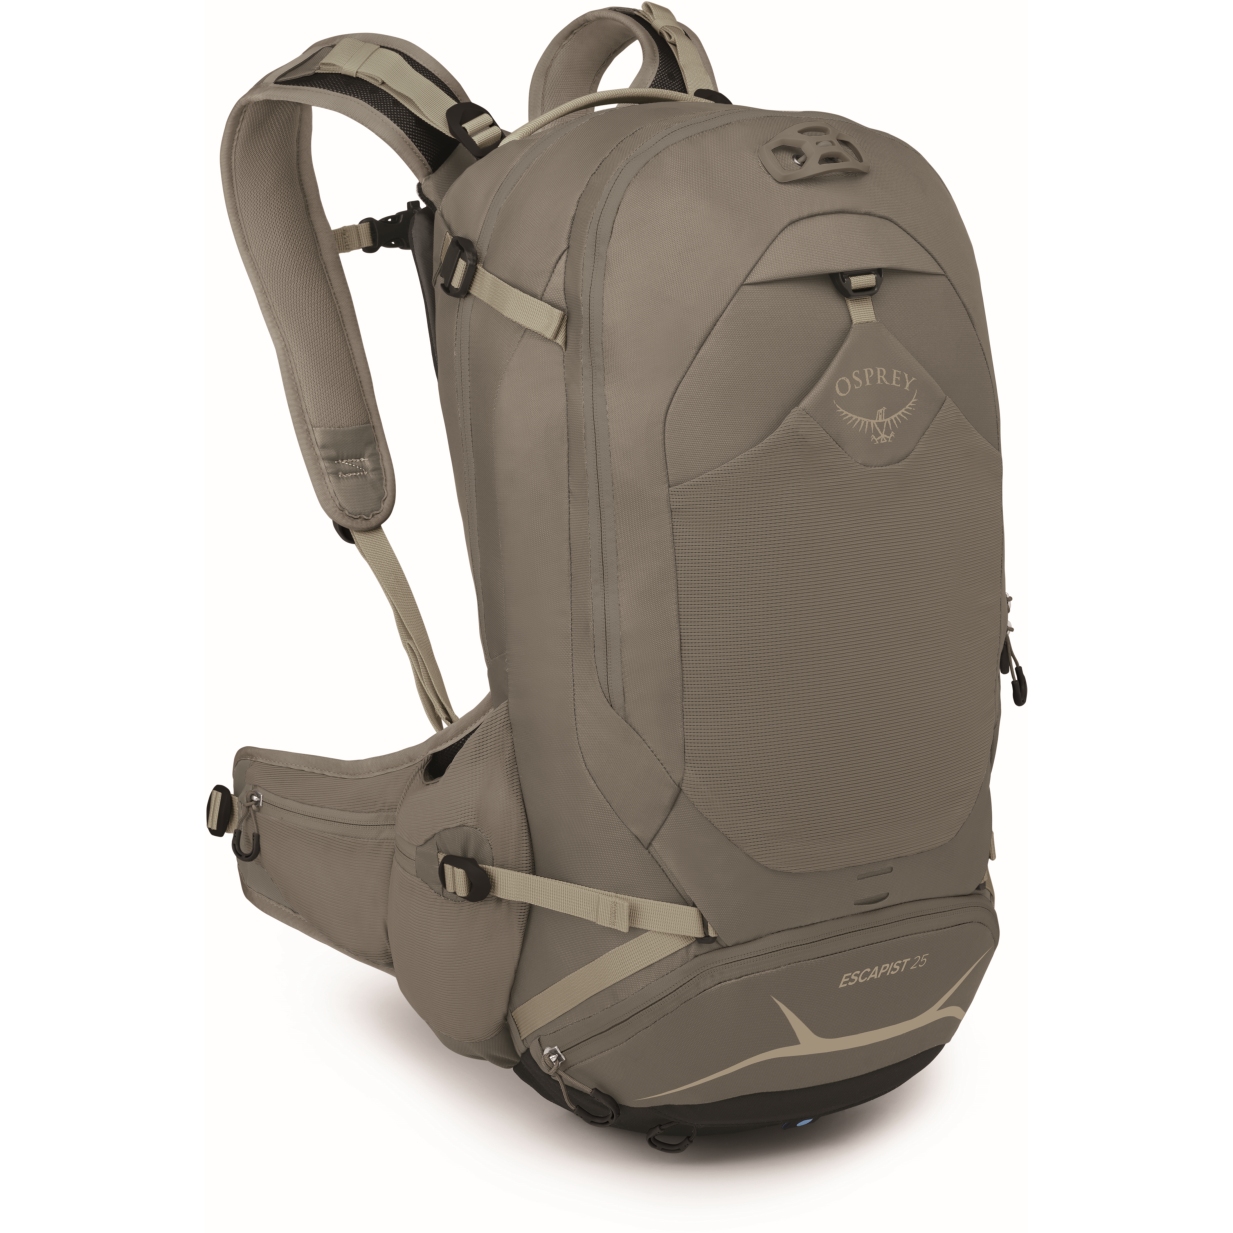 Picture of Osprey Escapist 25 Backpack - Tan Concrete - S/M